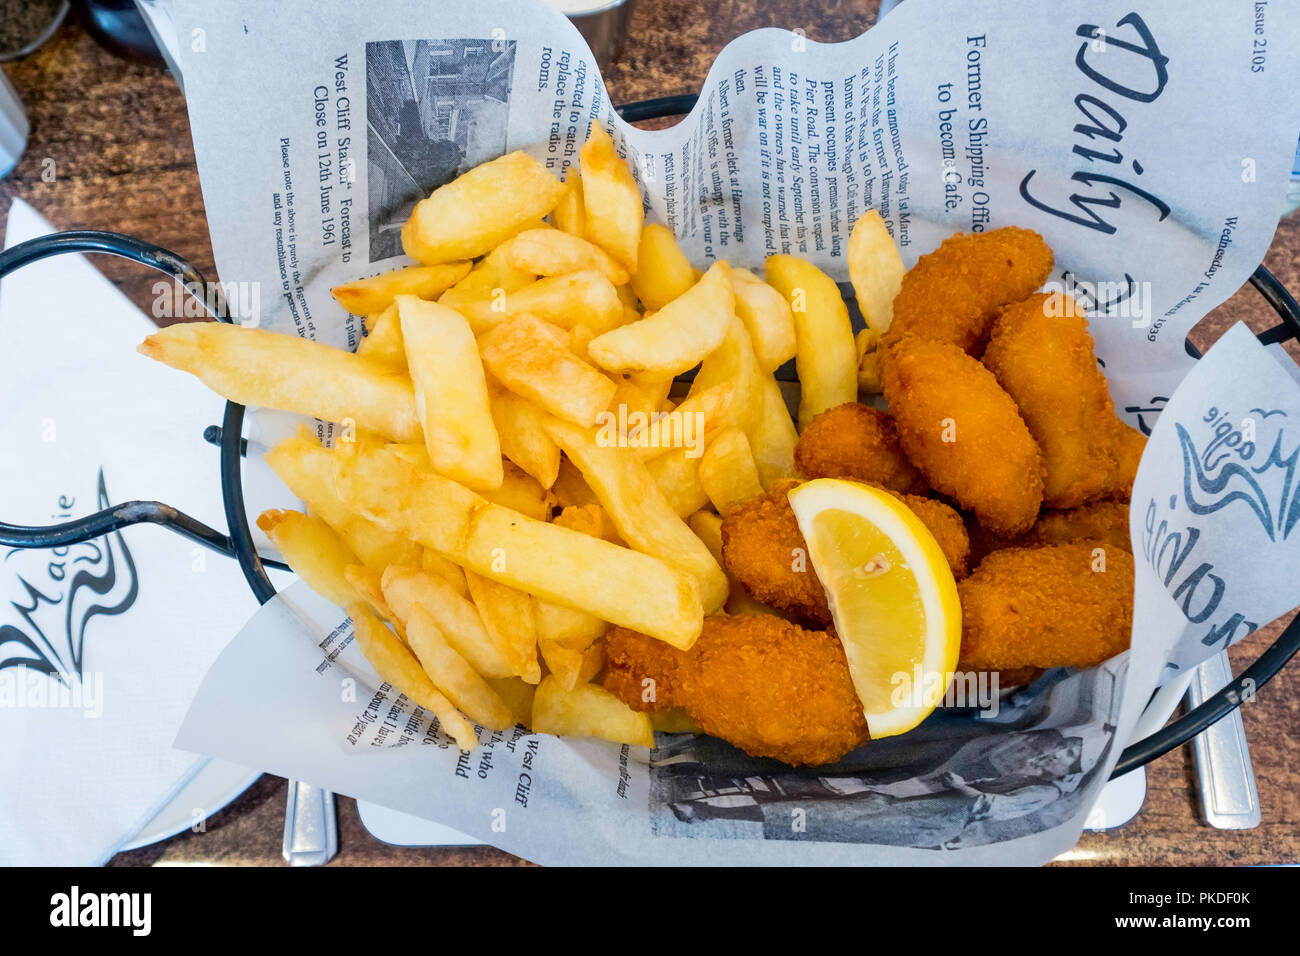 Magpie Cafe Whitby Scampi and Chips Stock Photo